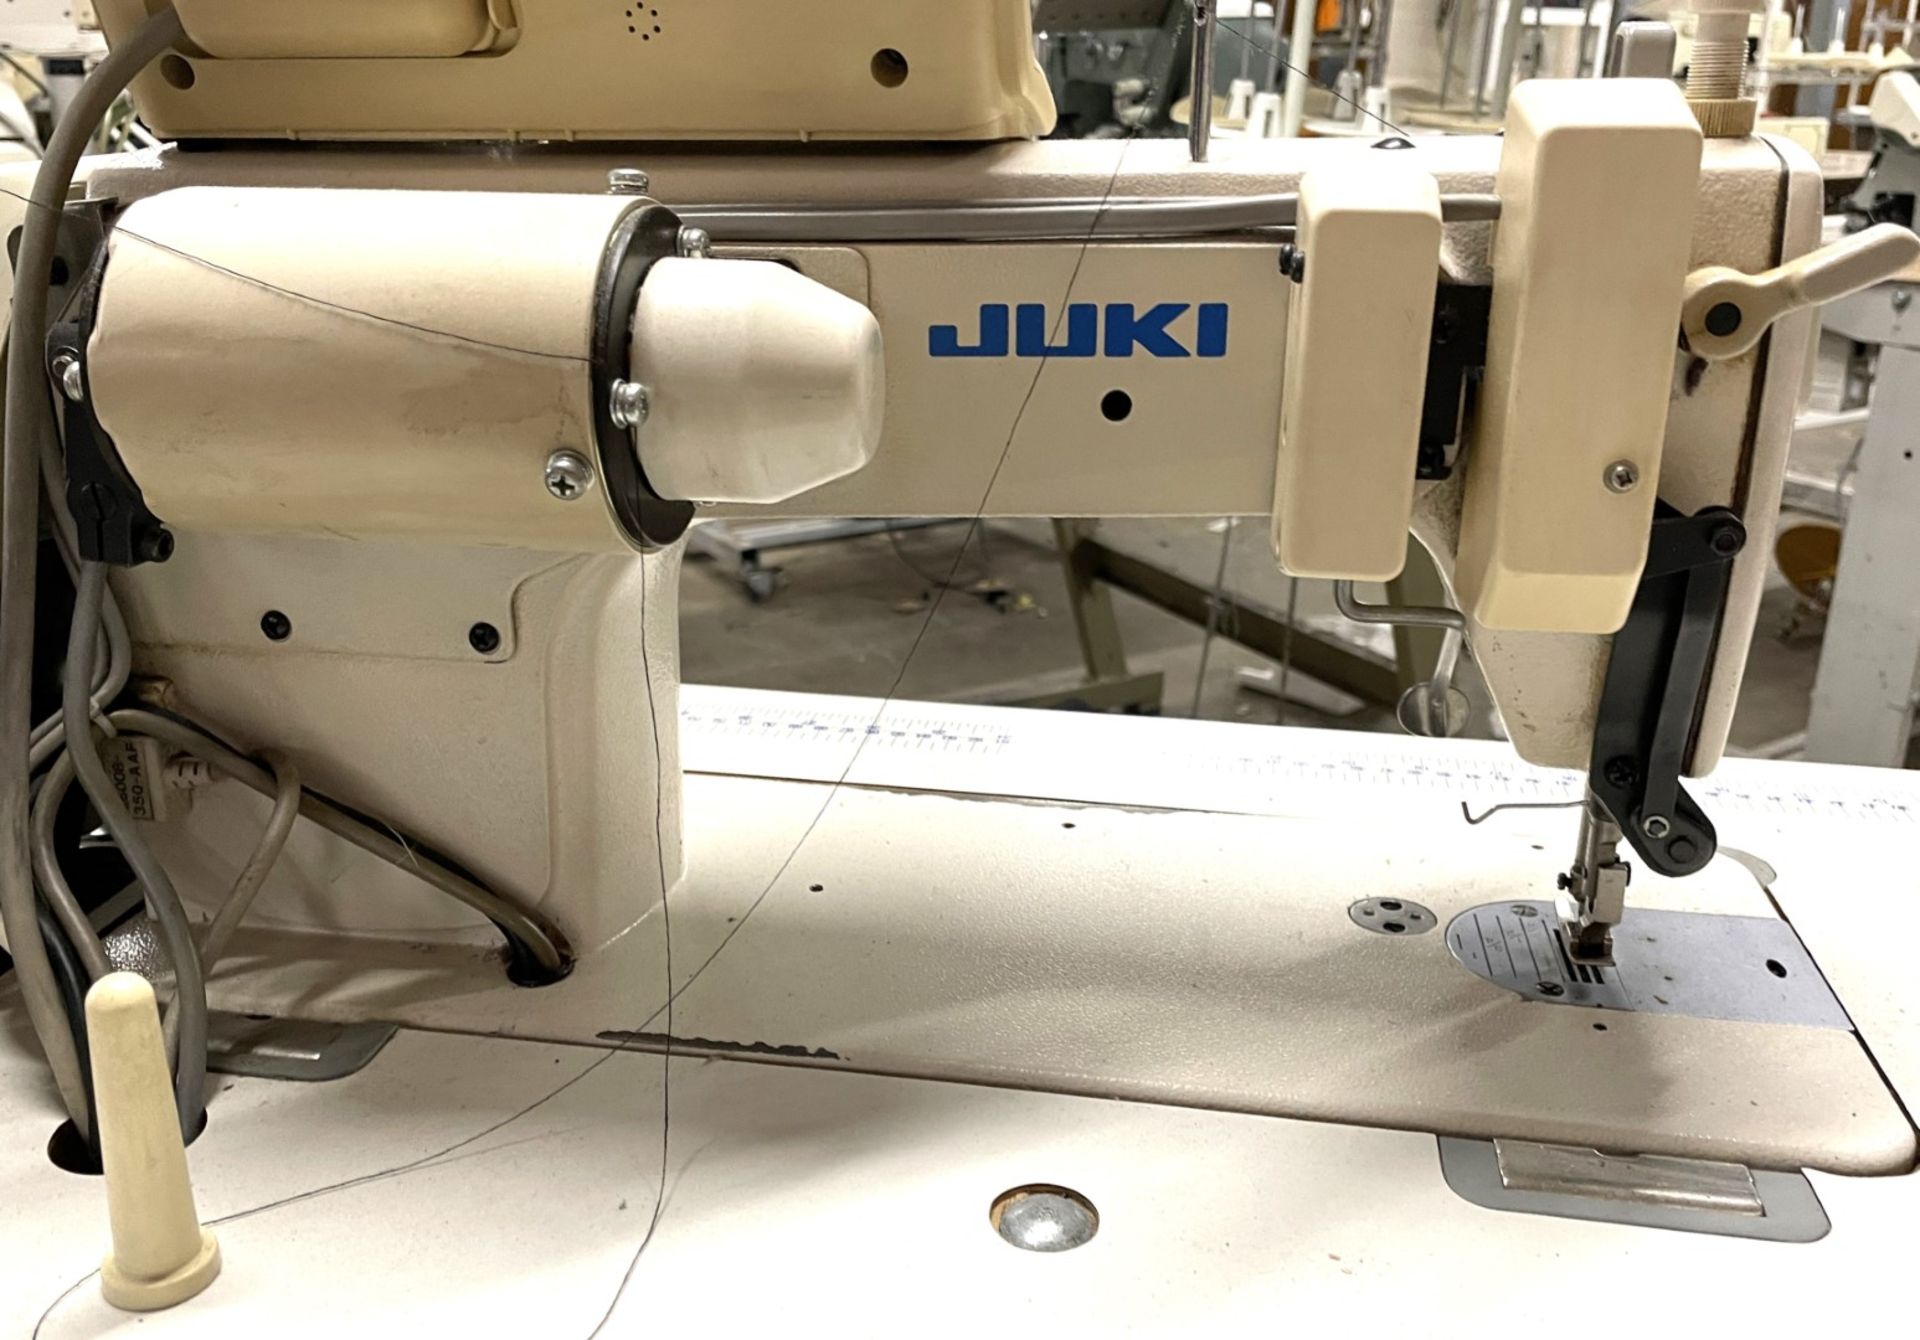 1 x Juki DDL850 Single Needle Automatic Lockstitch Industrial Sewing Machine With Table - Image 10 of 16